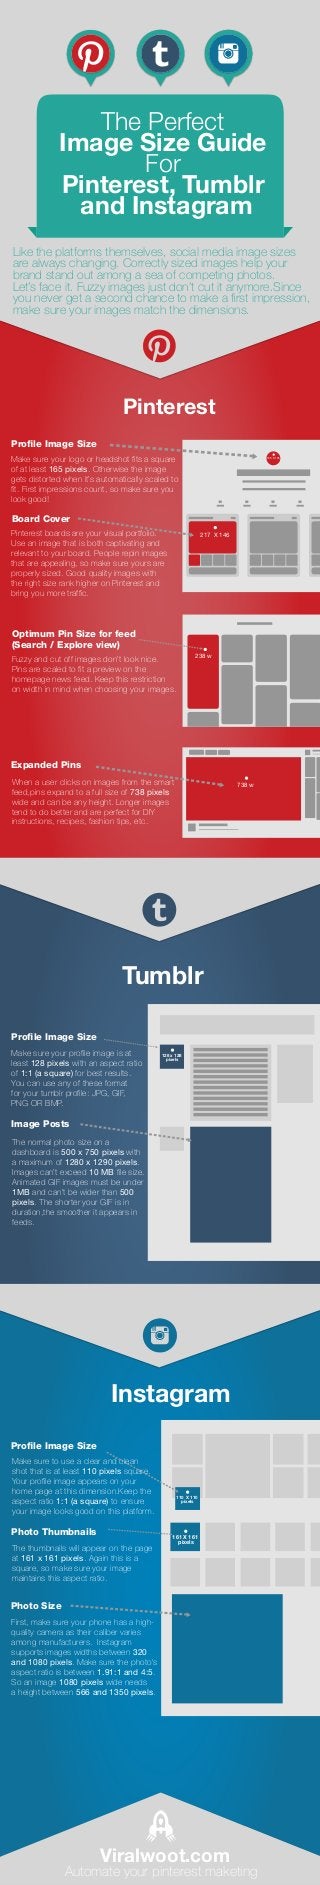 Make sure your profile image is at
least 128 pixels with an aspect ratio
of 1:1 (a square) for best results.
You can use any of these format
for your tumblr profile: JPG, GIF,
PNG OR BMP.
The normal photo size on a
dashboard is 500 x 750 pixels with
a maximum of 1280 x 1290 pixels.
Images can’t exceed 10 MB file size.
Animated GIF images must be under
1MB and can’t be wider than 500
pixels. The shorter your GIF is in
duration,the smoother it appears in
feeds.
128 x 128
pixels
Make sure your logo or headshot fits a square
of at least 165 pixels. Otherwise the image
gets distorted when it’s automatically scaled to
fit. First impressions count, so make sure you
look good!
Profile Image Size
165 X 165
Pinterest boards are your visual portfolio.
Use an image that is both captivating and
relevant to your board. People repin images
that are appealing, so make sure yours are
properly sized. Good quality images with
the right size rank higher on Pinterest and
bring you more traffic.
217 X 146
Fuzzy and cut off images don’t look nice.
Pins are scaled to fit a preview on the
homepage news feed. Keep this restriction
on width in mind when choosing your images.
238 w
When a user clicks on images from the smart
feed,pins expand to a full size of 738 pixels
wide and can be any height. Longer images
tend to do better and are perfect for DIY
instructions, recipes, fashion tips, etc.
738 w
First, make sure your phone has a high-
quality camera as their caliber varies
among manufacturers. Instagram
supports images widths between 320
and 1080 pixels. Make sure the photo's
aspect ratio is between 1.91:1 and 4:5.
So an image 1080 pixels wide needs
a height between 566 and 1350 pixels.
Instagram
Tumblr
Pinterest
The thumbnails will appear on the page
at 161 x 161 pixels. Again this is a
square, so make sure your image
maintains this aspect ratio.
110 X 110
pixels
161 X 161
pixels
Make sure to use a clear and clean
shot that is at least 110 pixels square.
Your profile image appears on your
home page at this dimension.Keep the
aspect ratio 1:1 (a square) to ensure
your image looks good on this platform.
Like the platforms themselves, social media image sizes
are always changing. Correctly sized images help your
brand stand out among a sea of competing photos.
Let’s face it. Fuzzy images just don’t cut it anymore.Since
you never get a second chance to make a first impression,
make sure your images match the dimensions.
The Perfect
Image Size Guide
For
Pinterest, Tumblr
and Instagram
Viralwoot.com
Automate your pinterest maketing
Board Cover
Optimum Pin Size for feed
(Search / Explore view)
Expanded Pins
Profile Image Size
Image Posts
Profile Image Size
Photo Thumbnails
Photo Size
 